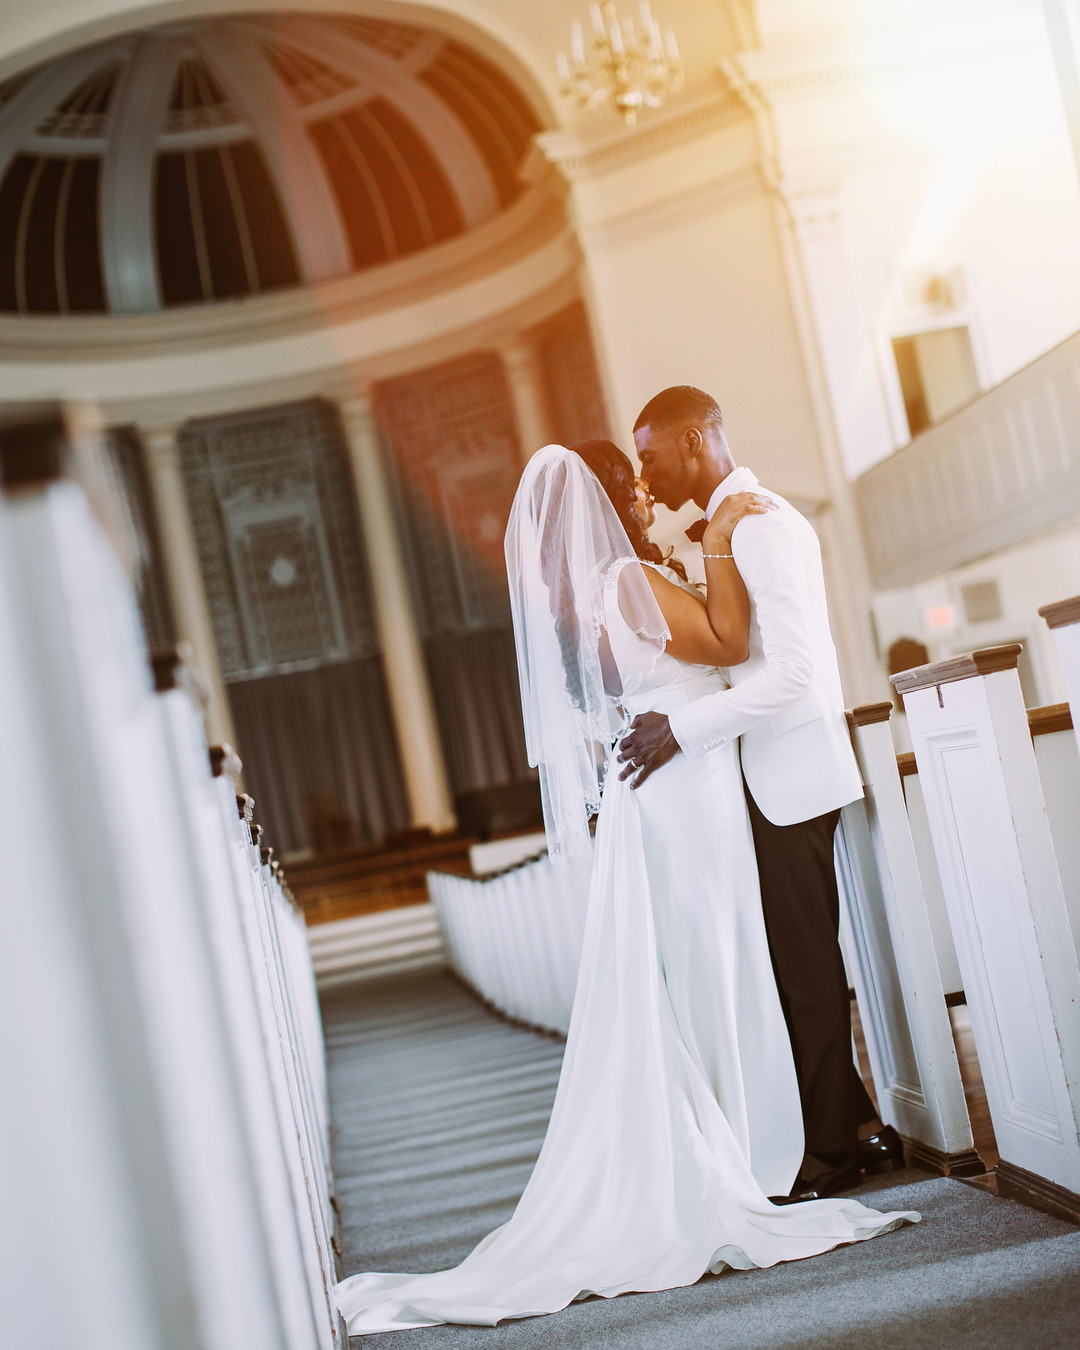 S U P R E M O™ — “Capturing Timeless Moments” is fancy wedding...